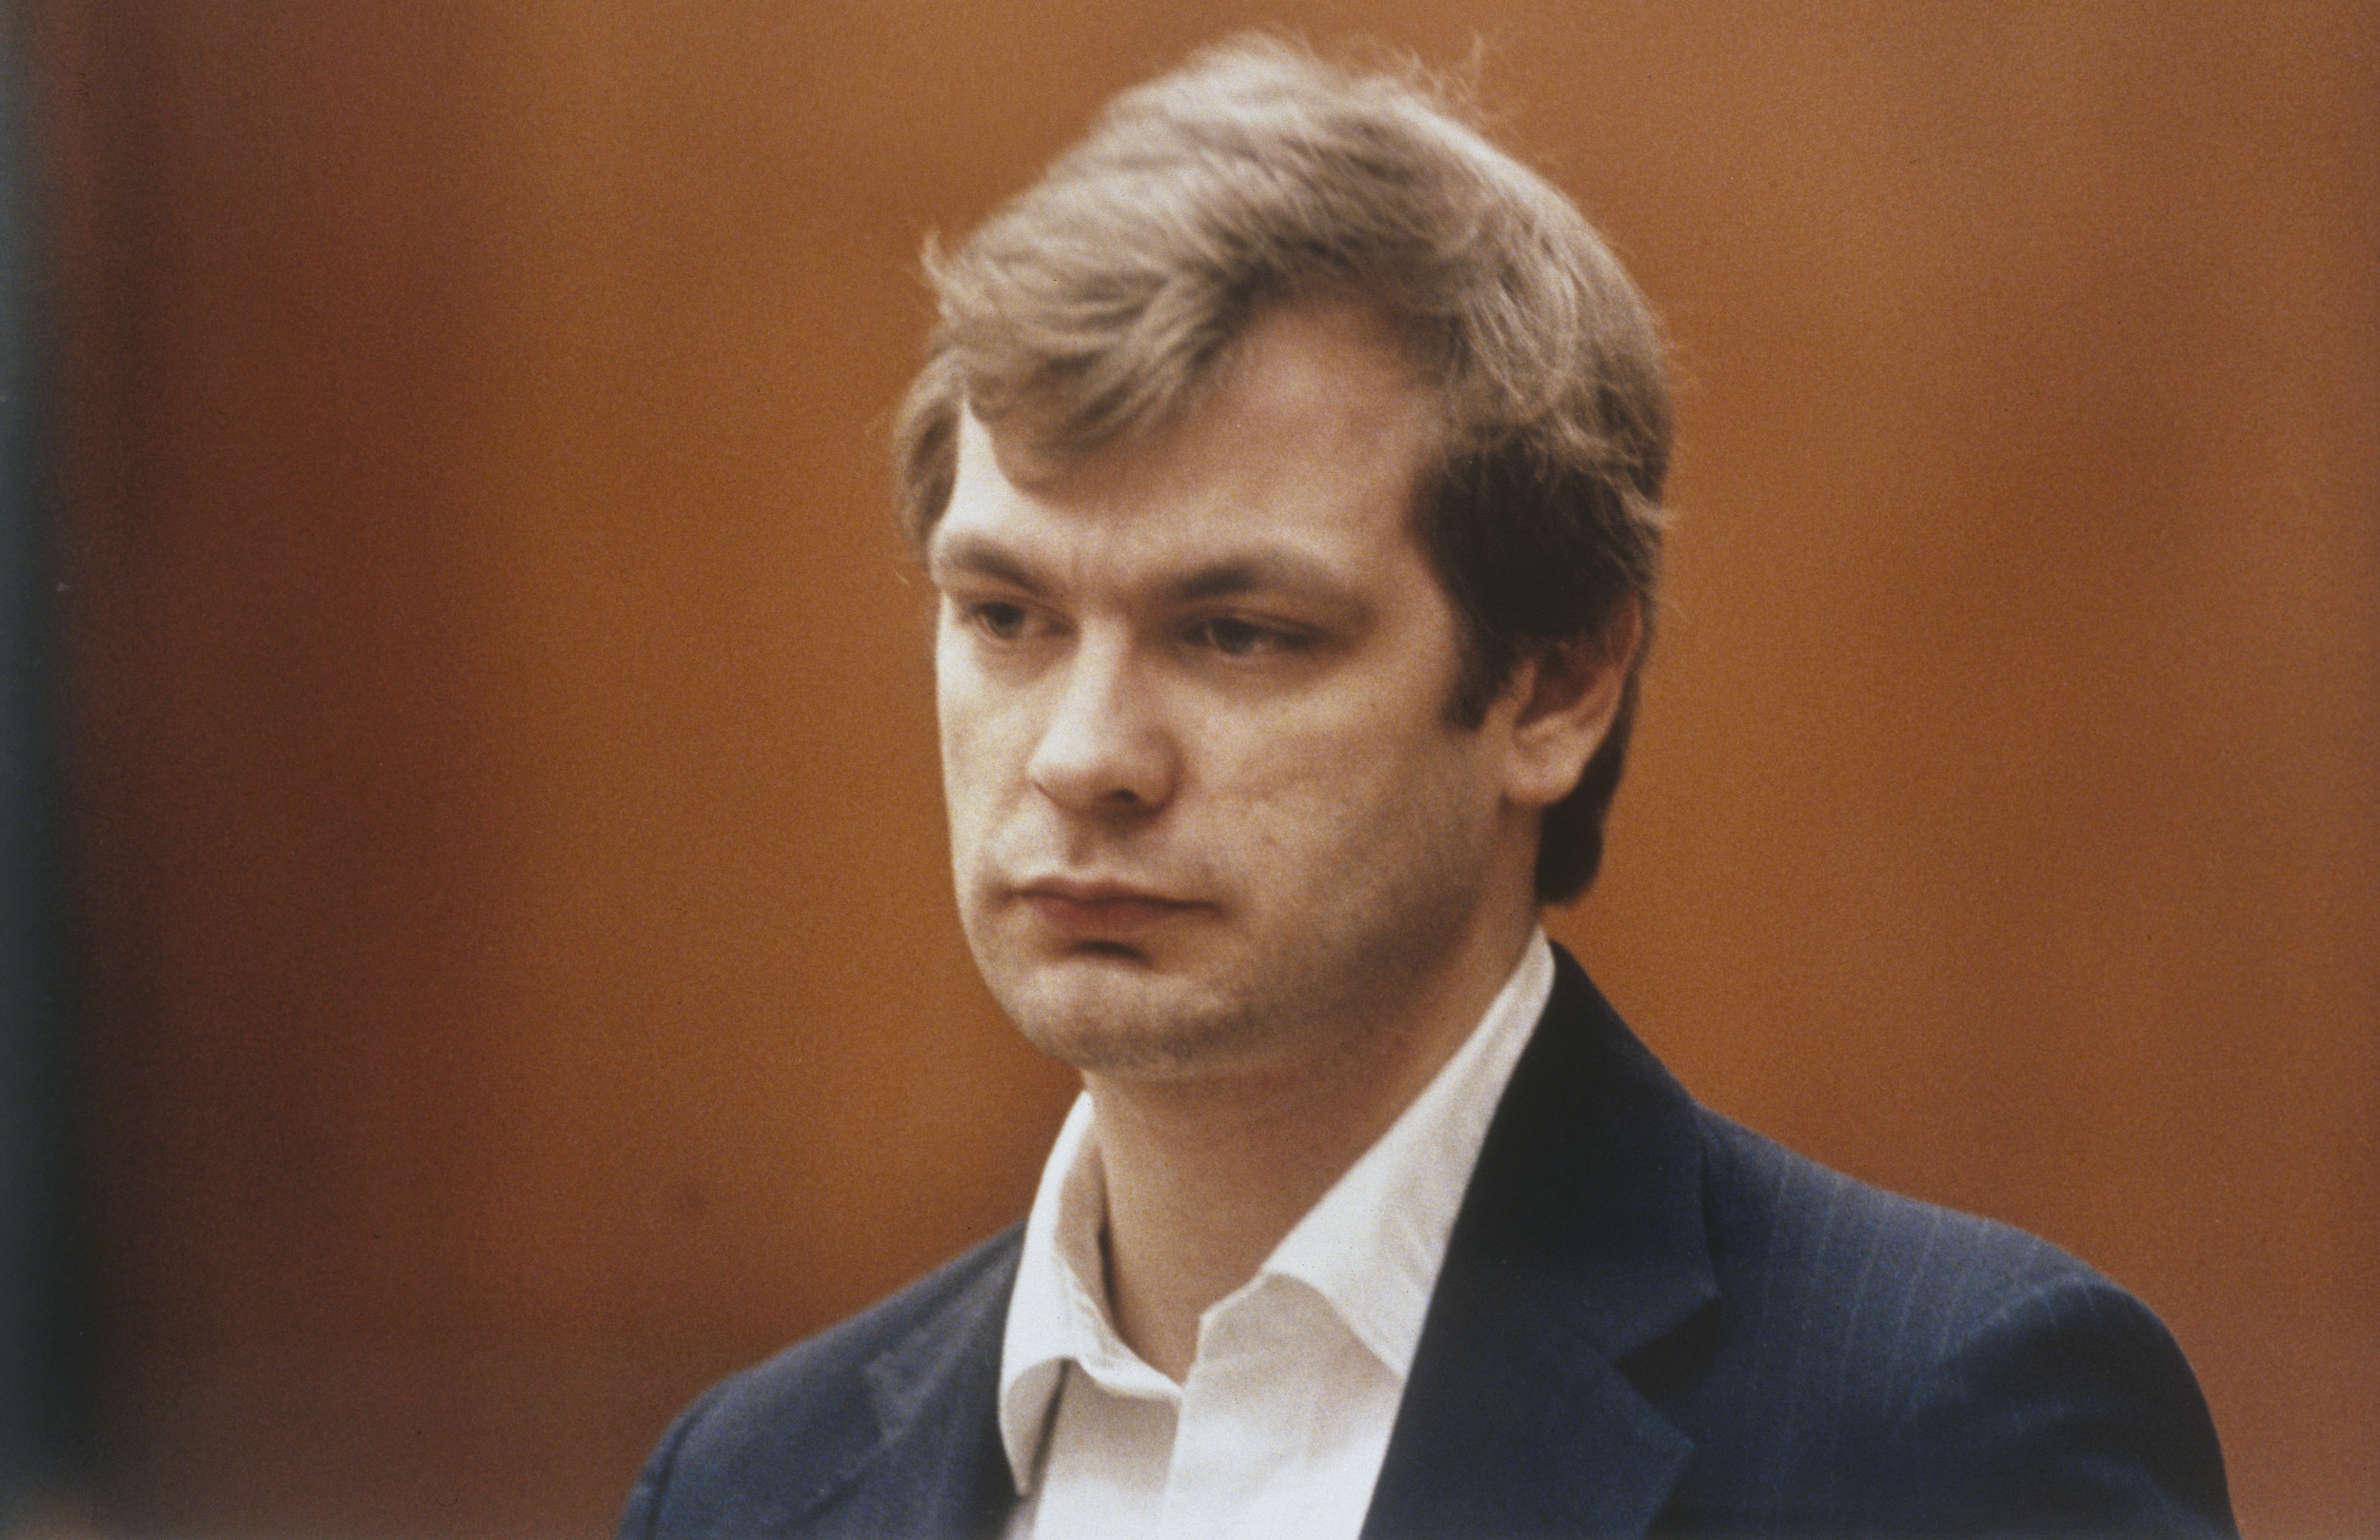 True-Crime Expert on Whether Jeffrey Dahmer's Childhood Made Him a Monster